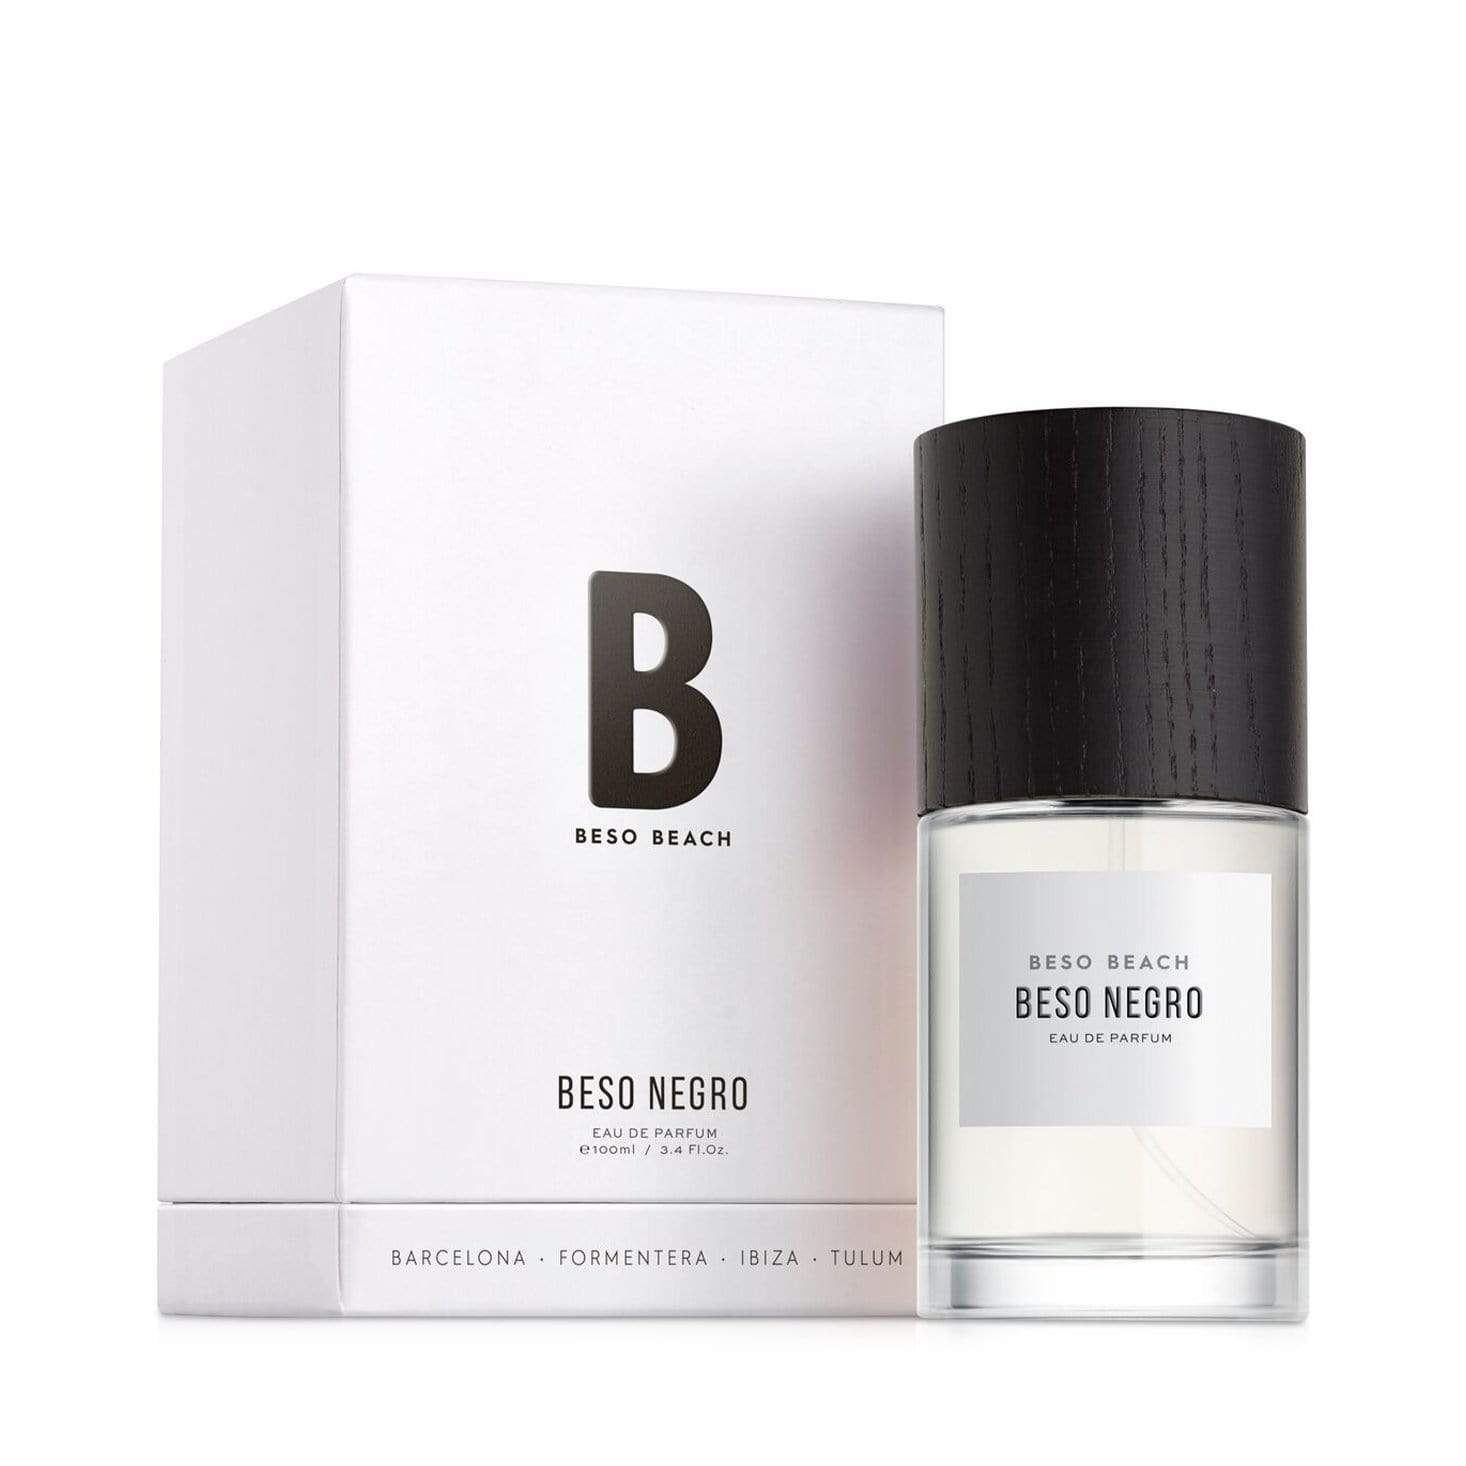 BEON.COM.AU Beso Negro pays homage to a memorable sunsets. The most provocative kiss... notes of violet and cardamom give way to the night, to the provocation of patchouli and to the wildest side of leather and sandalwood. A unique personality that unites in a carnal kiss where the darkness and the moon are ... Beso Beach at BEON.COM.AU